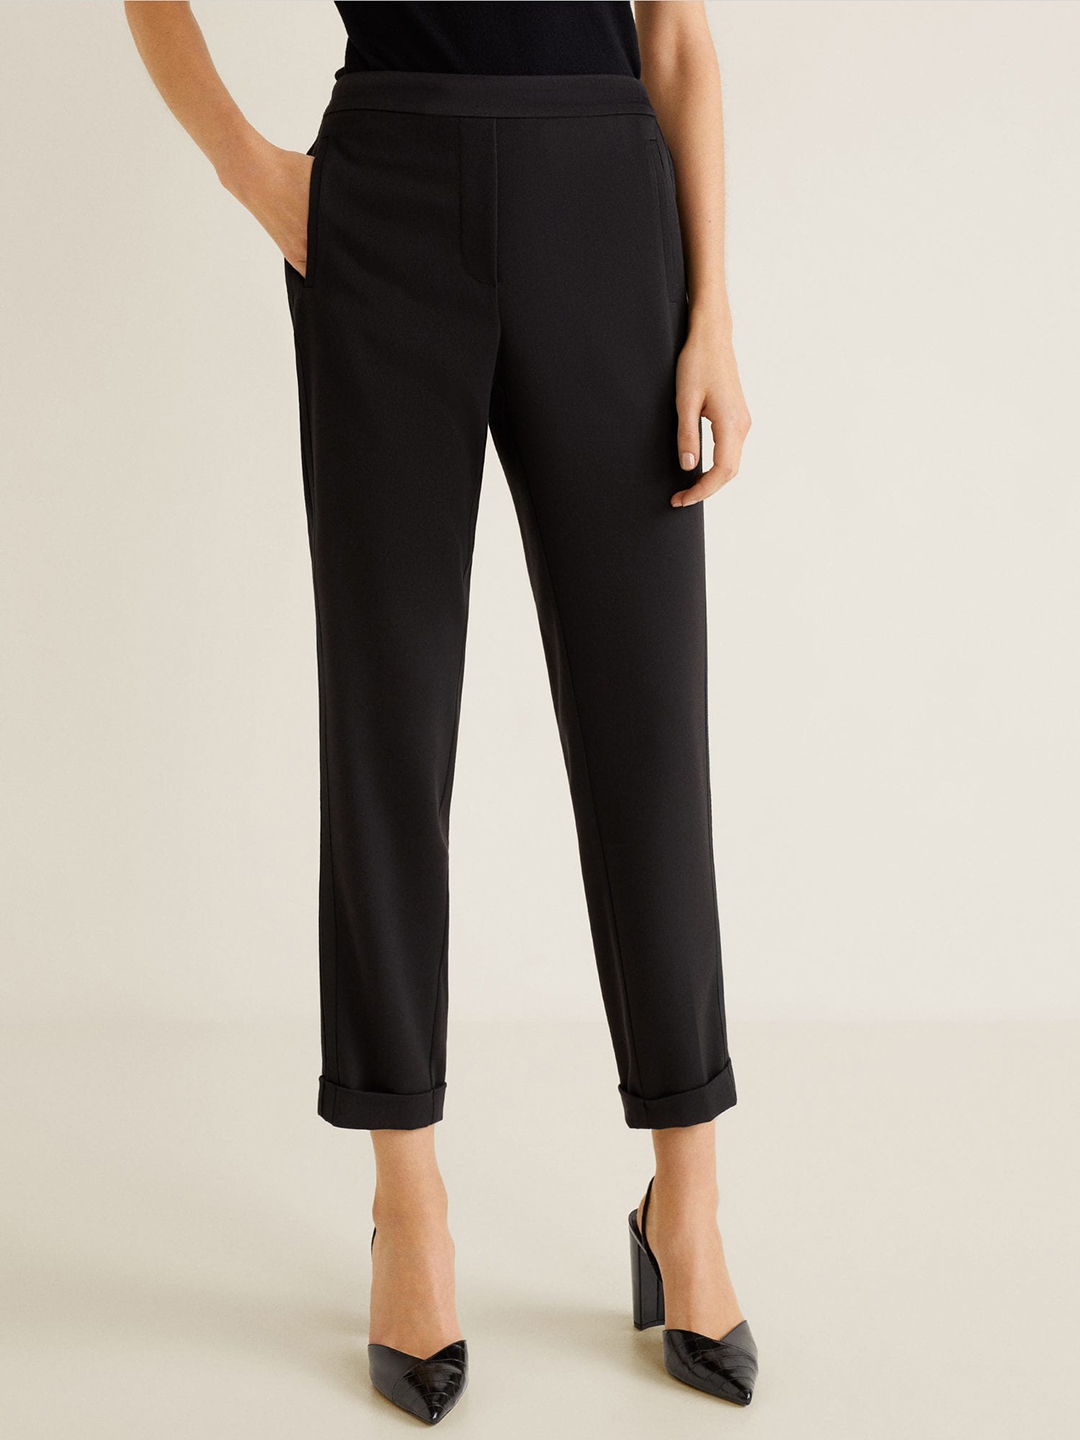 MANGO Women Navy Blue Regular Fit Solid Cropped Trousers